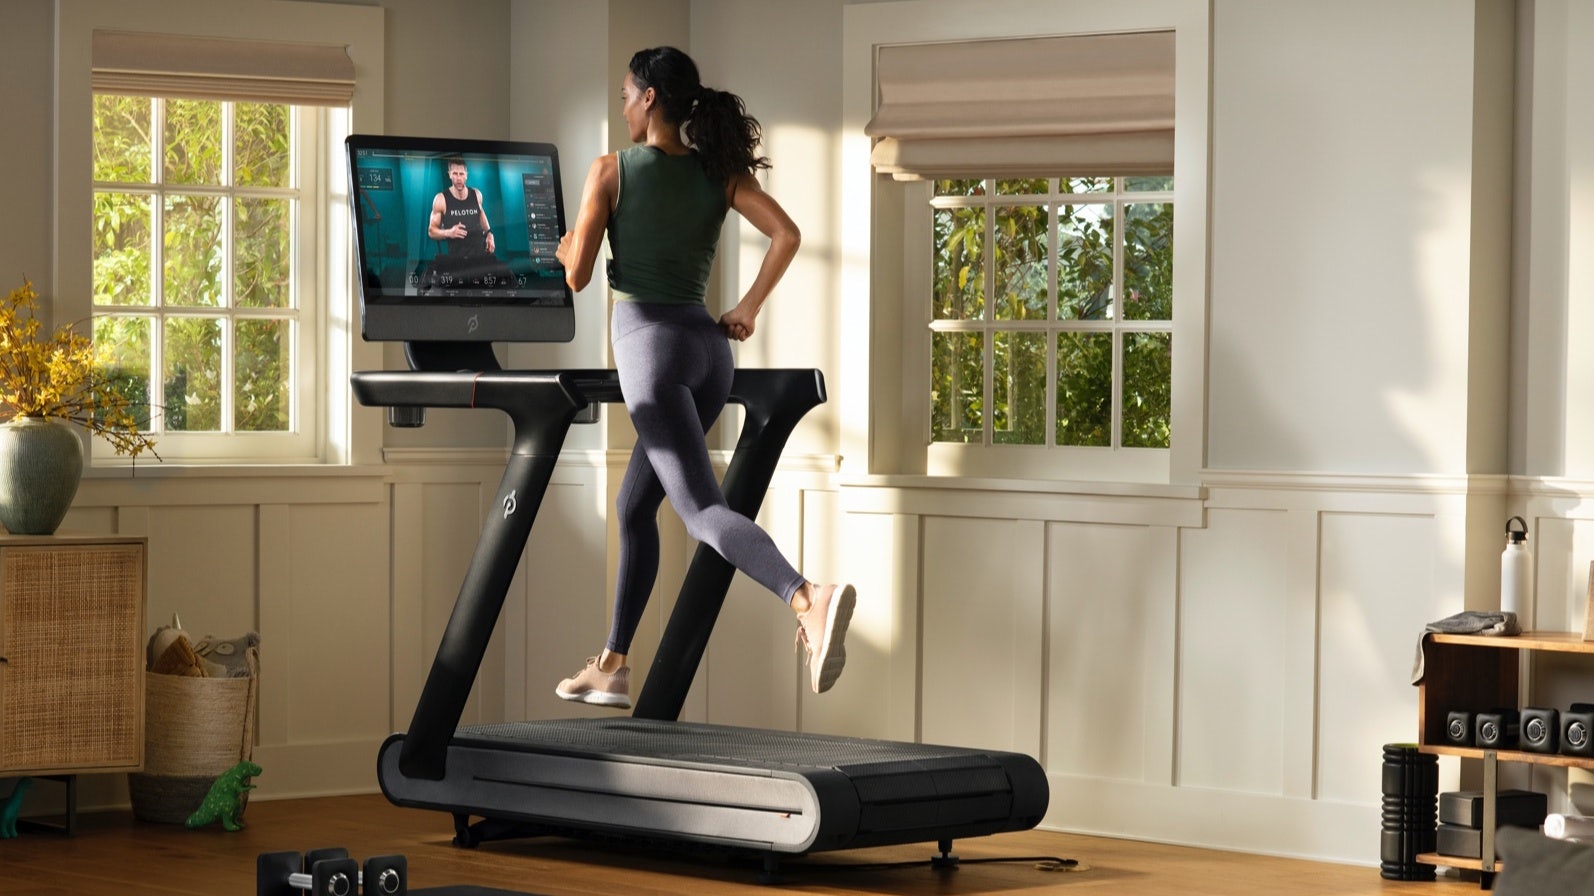 Peloton has become practically synonymous with connected fitness, but its response to treadmill safety issues has forced customers to break up with the brand.  Photo: Courtesy of Peloton